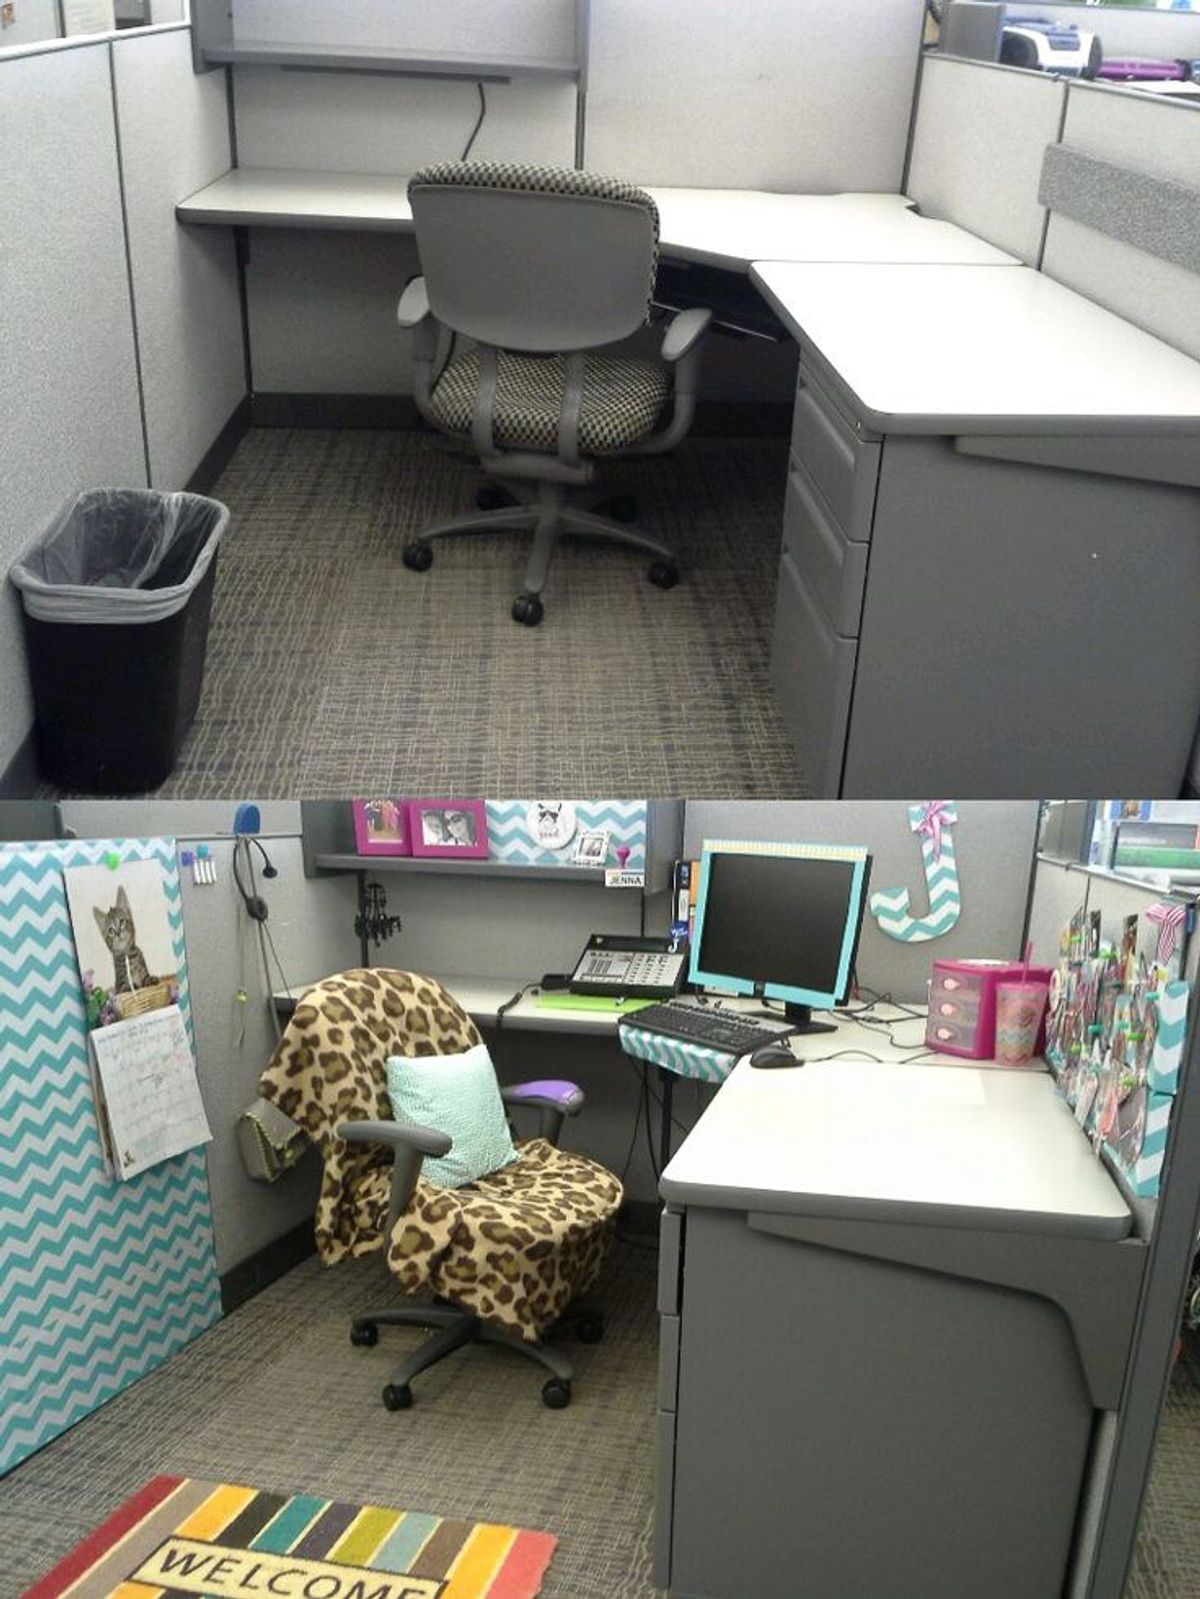 How To Keep Your Cubicle Cute!